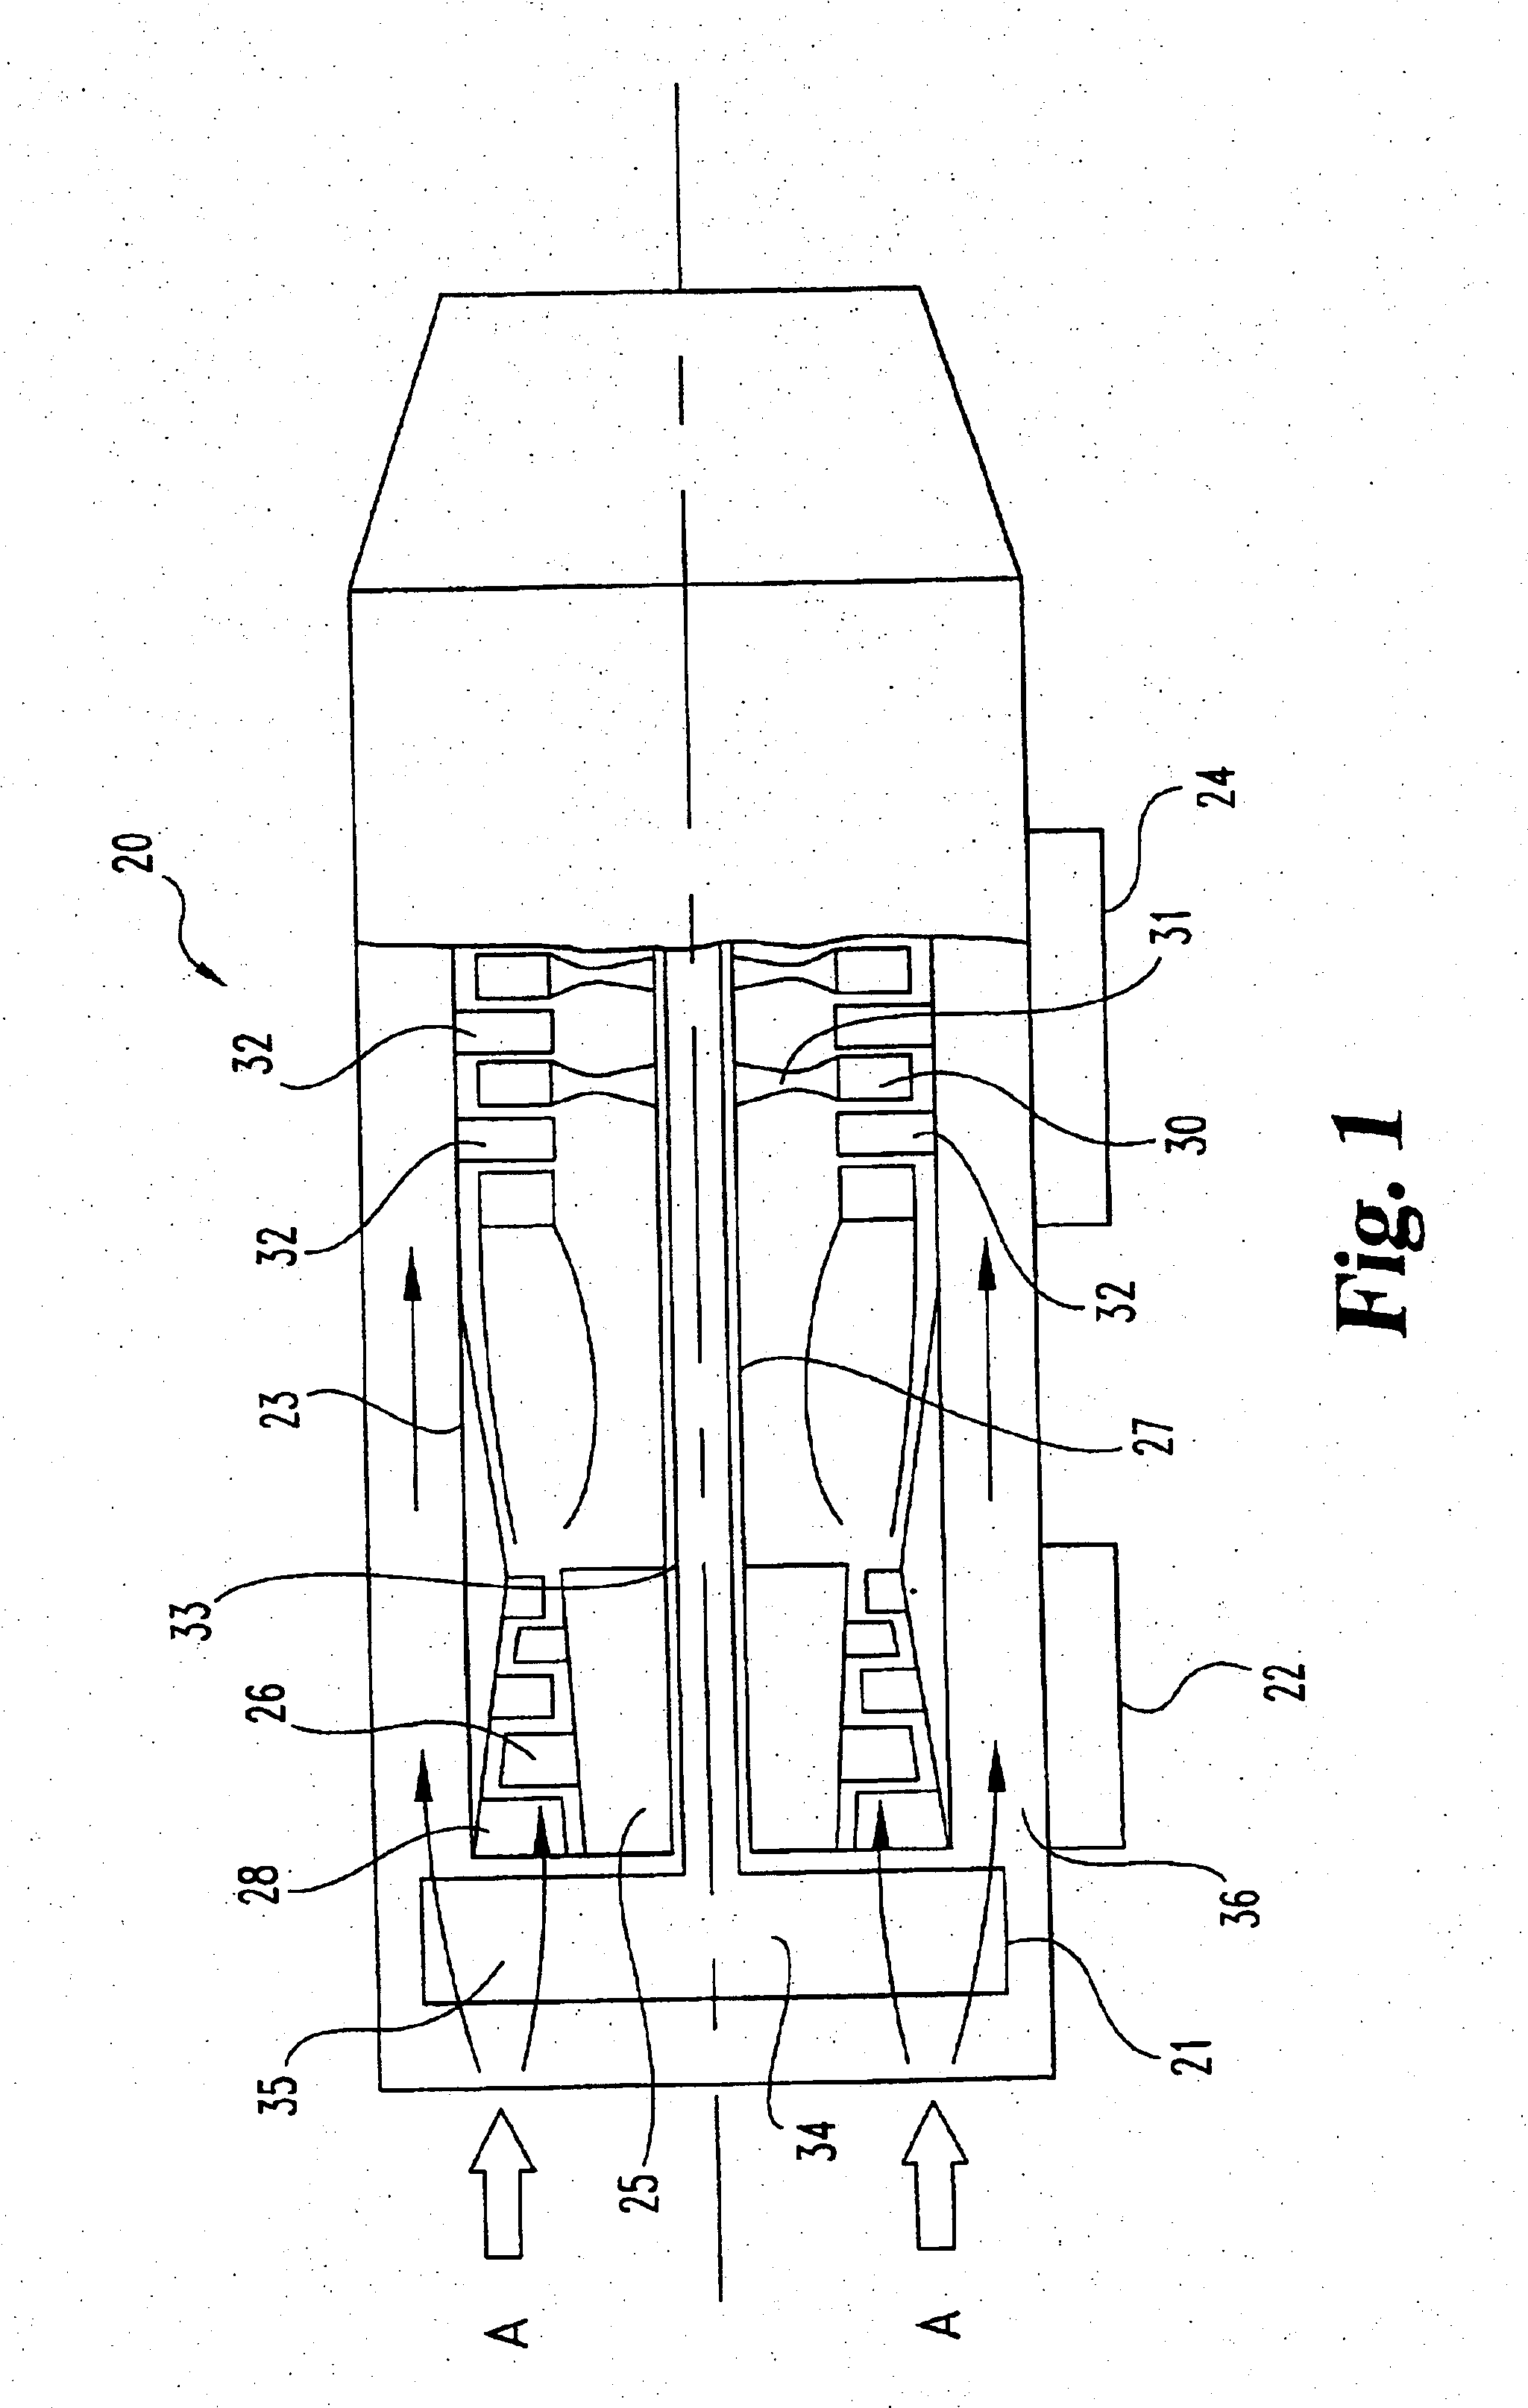 Method and apparatus for production of a cast component